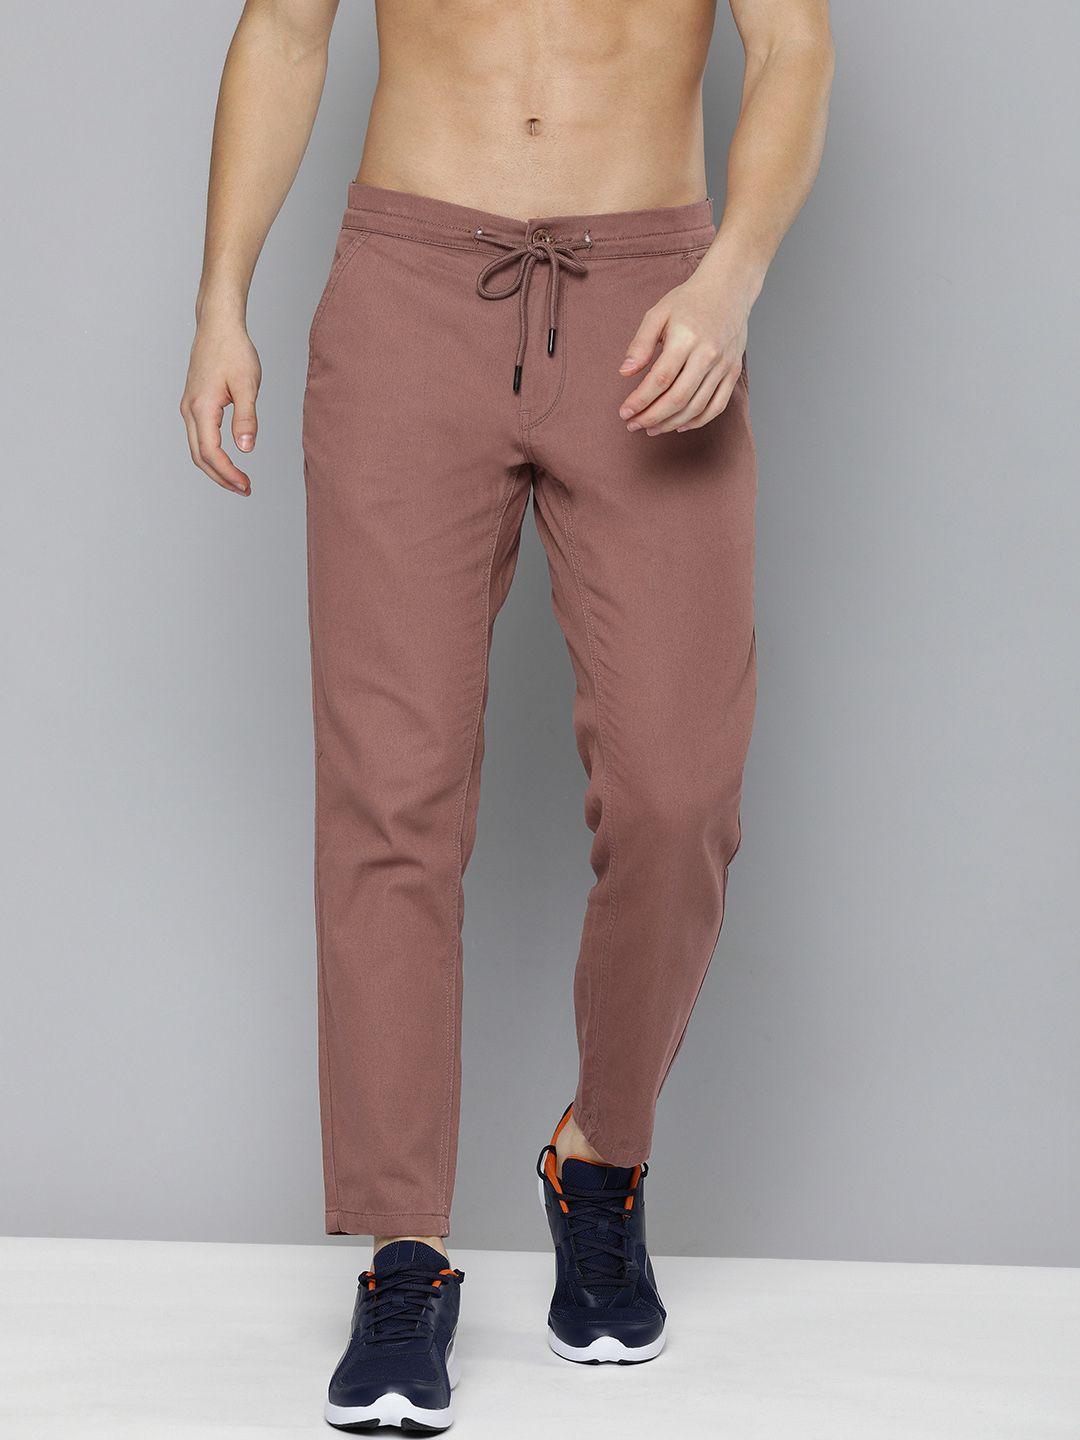 here&now men light mauve slim fit chinos trousers